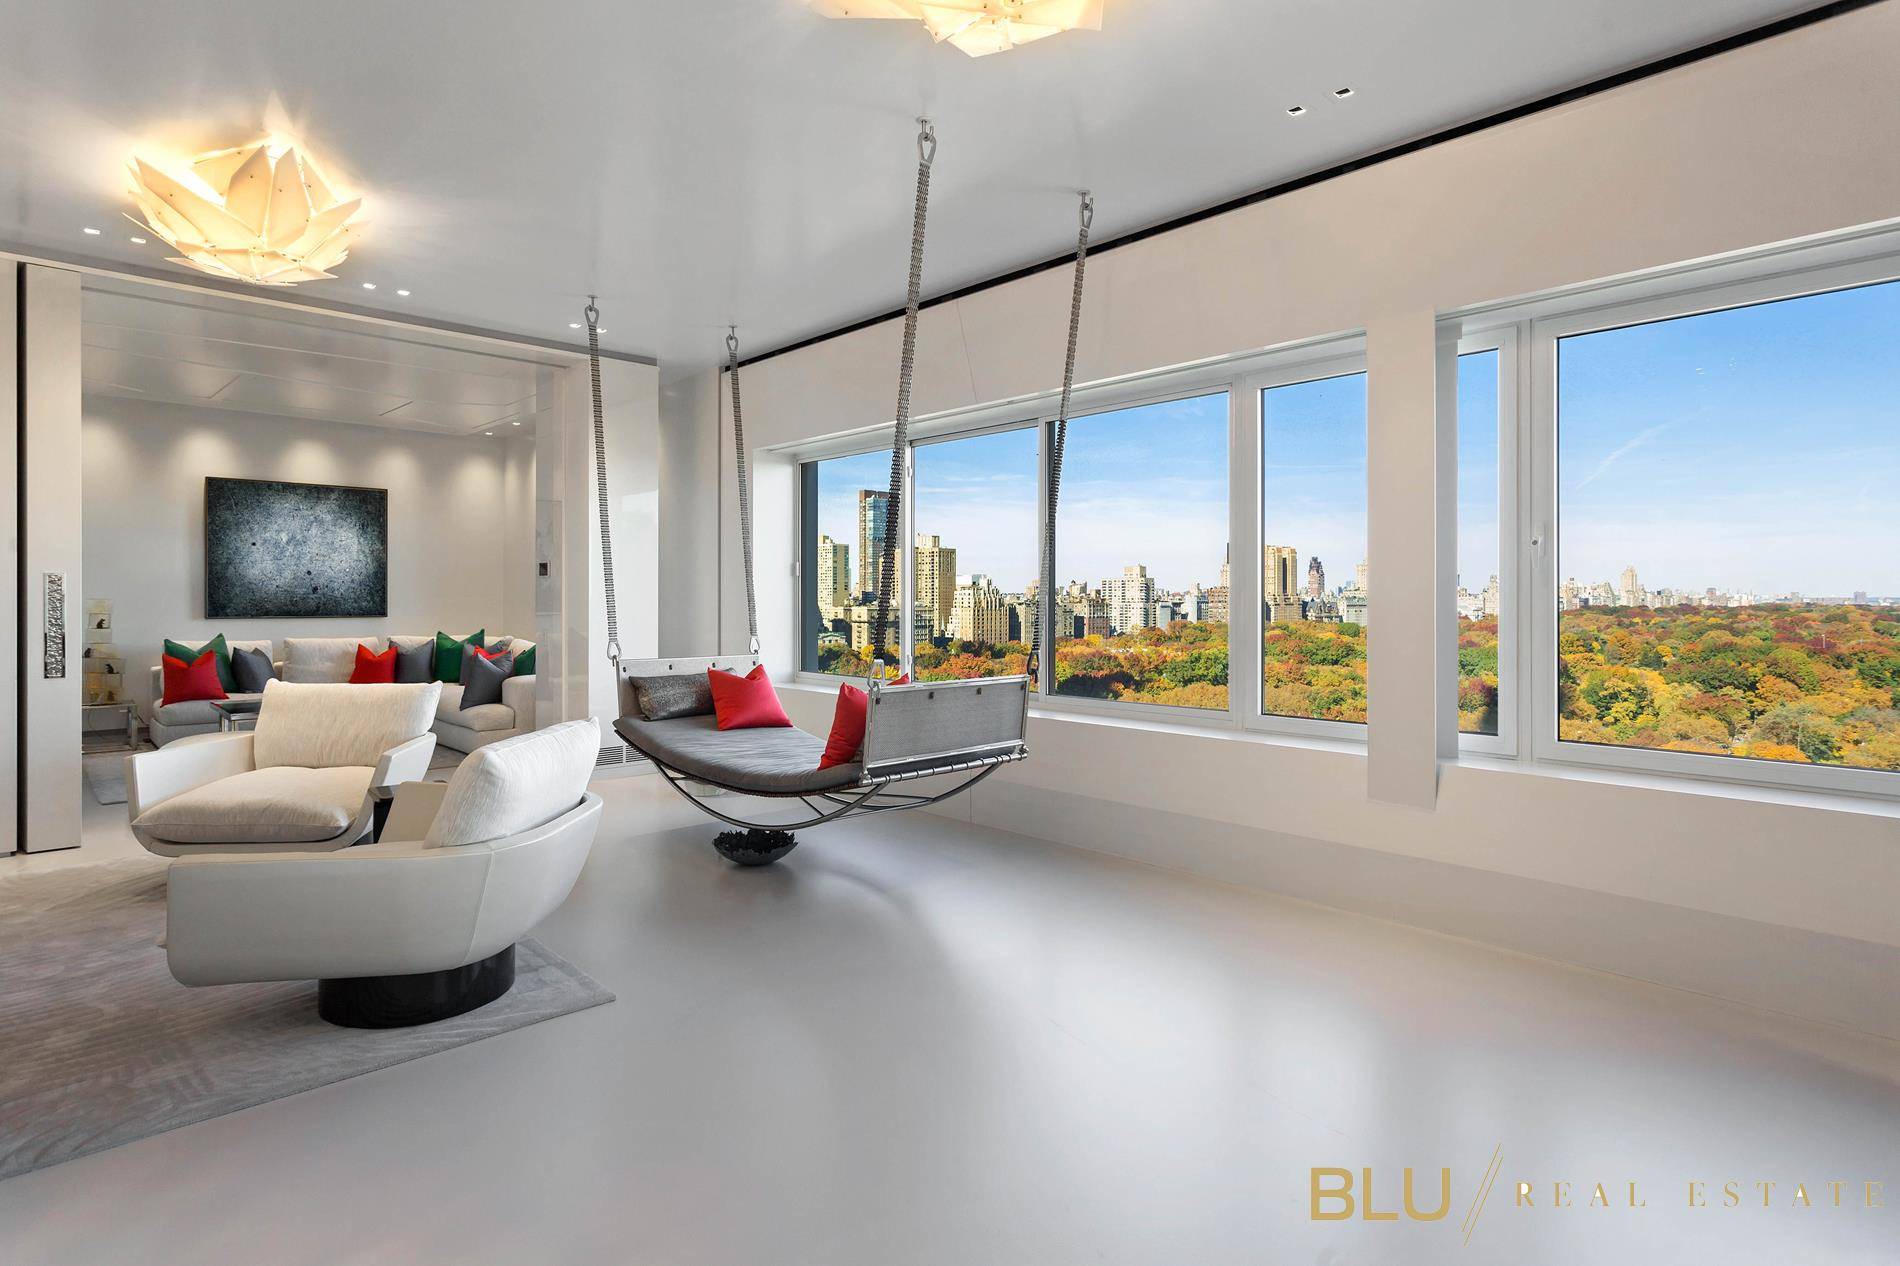 Luxury modern design is waiting for you at 106 Central Park South.